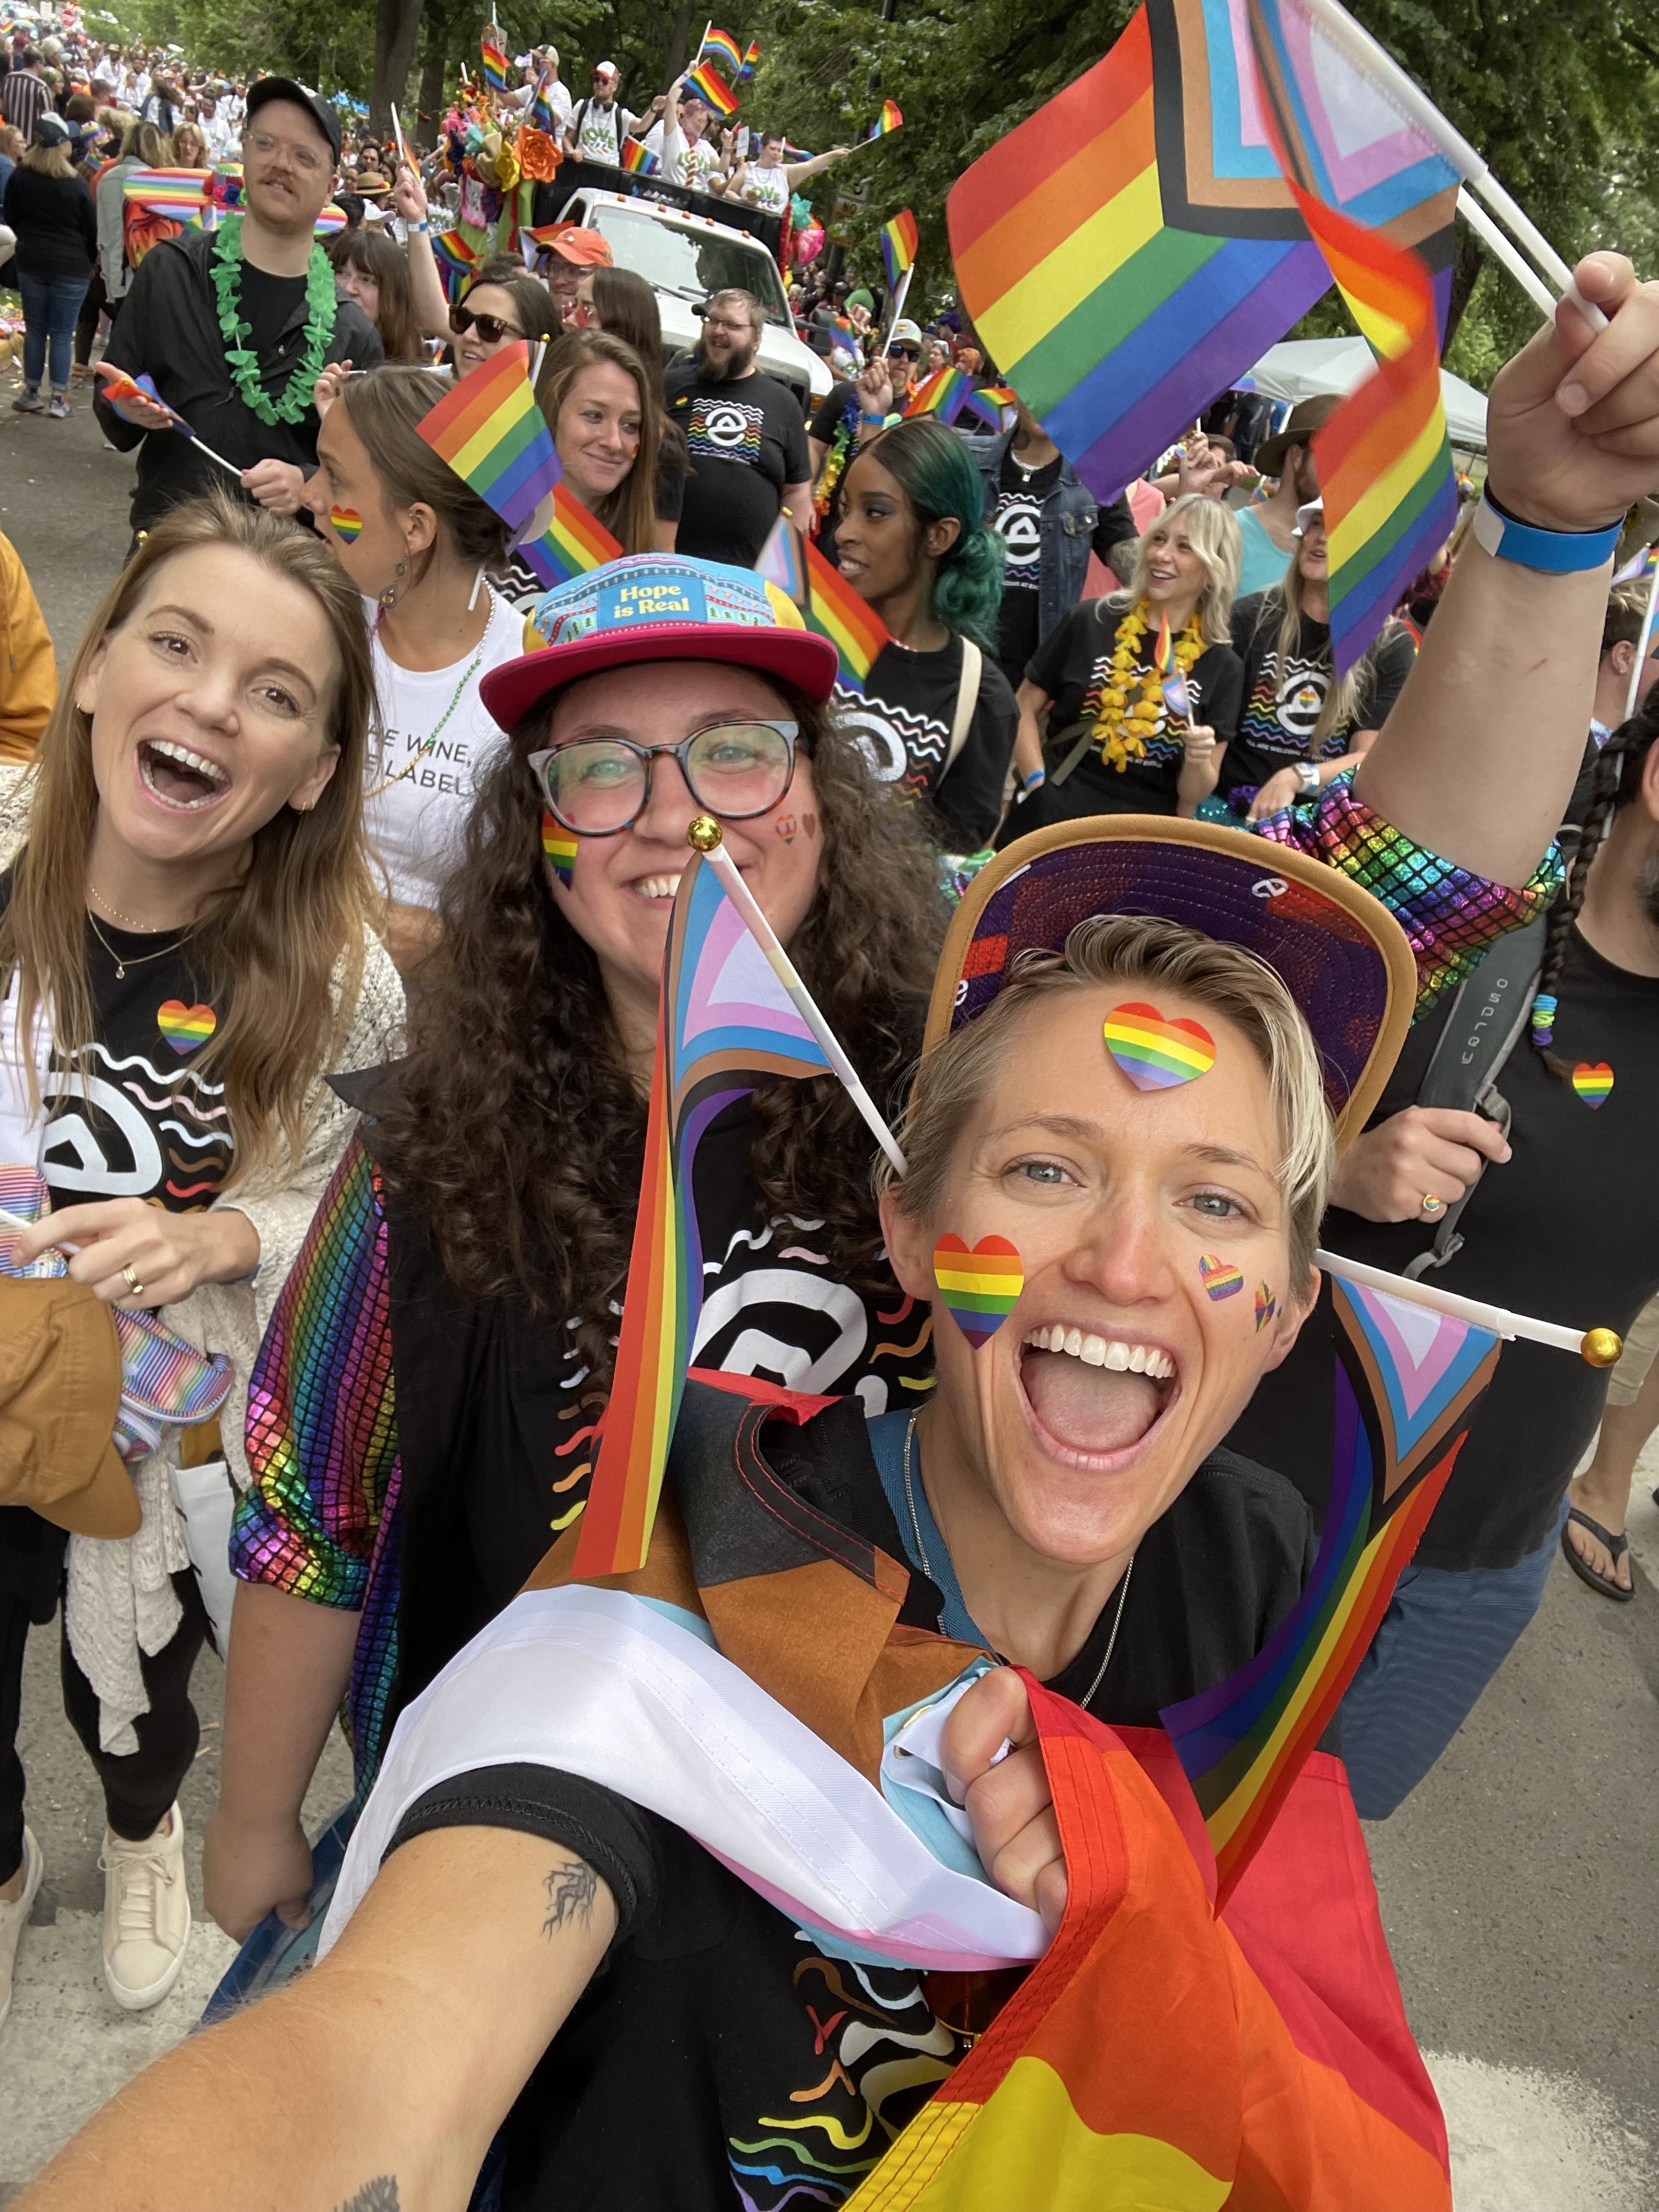 Evolve team members smile and celebrate at a Pride event. with rainbow attire and flags.